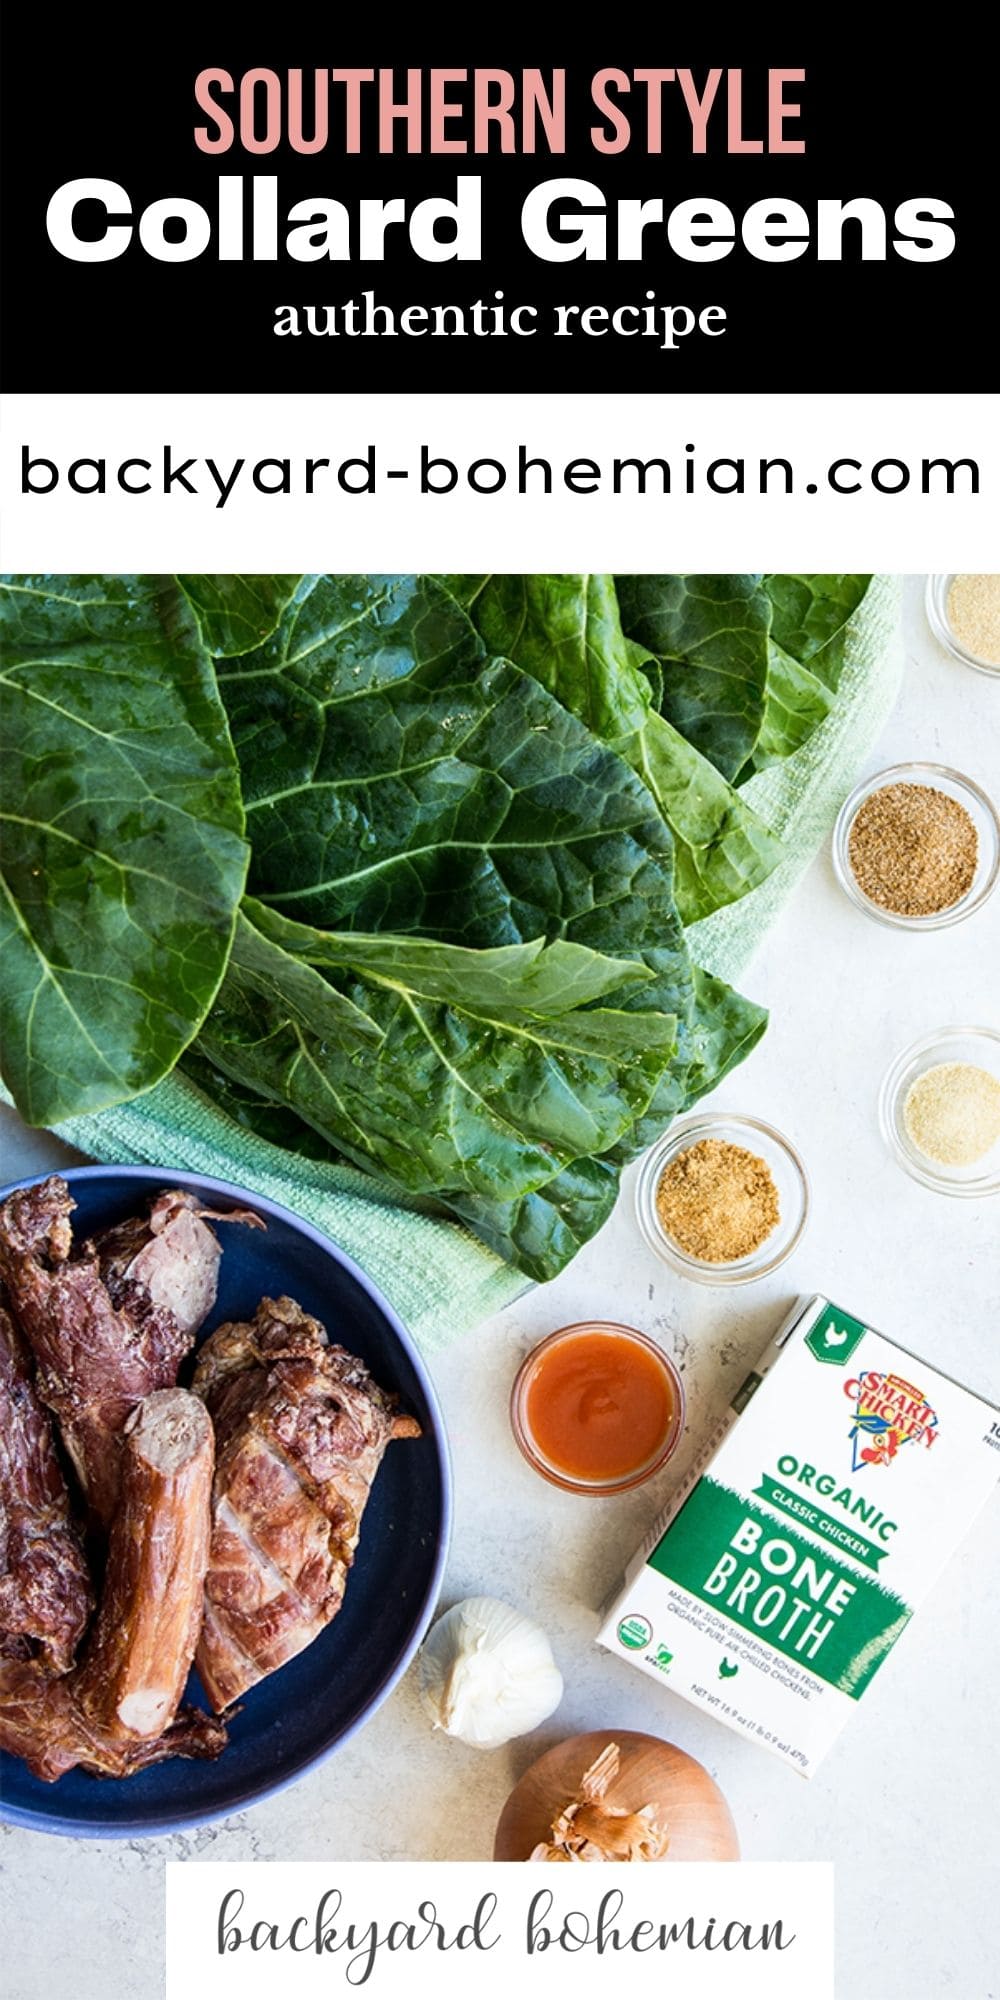 Southern style collard greens are simmered for hours with smoked turkey necks and loads of seasoning to provide the most velvety, decadent greens you've ever had! This is a true southern recipe that has been passed down for generations! via @foodhussy